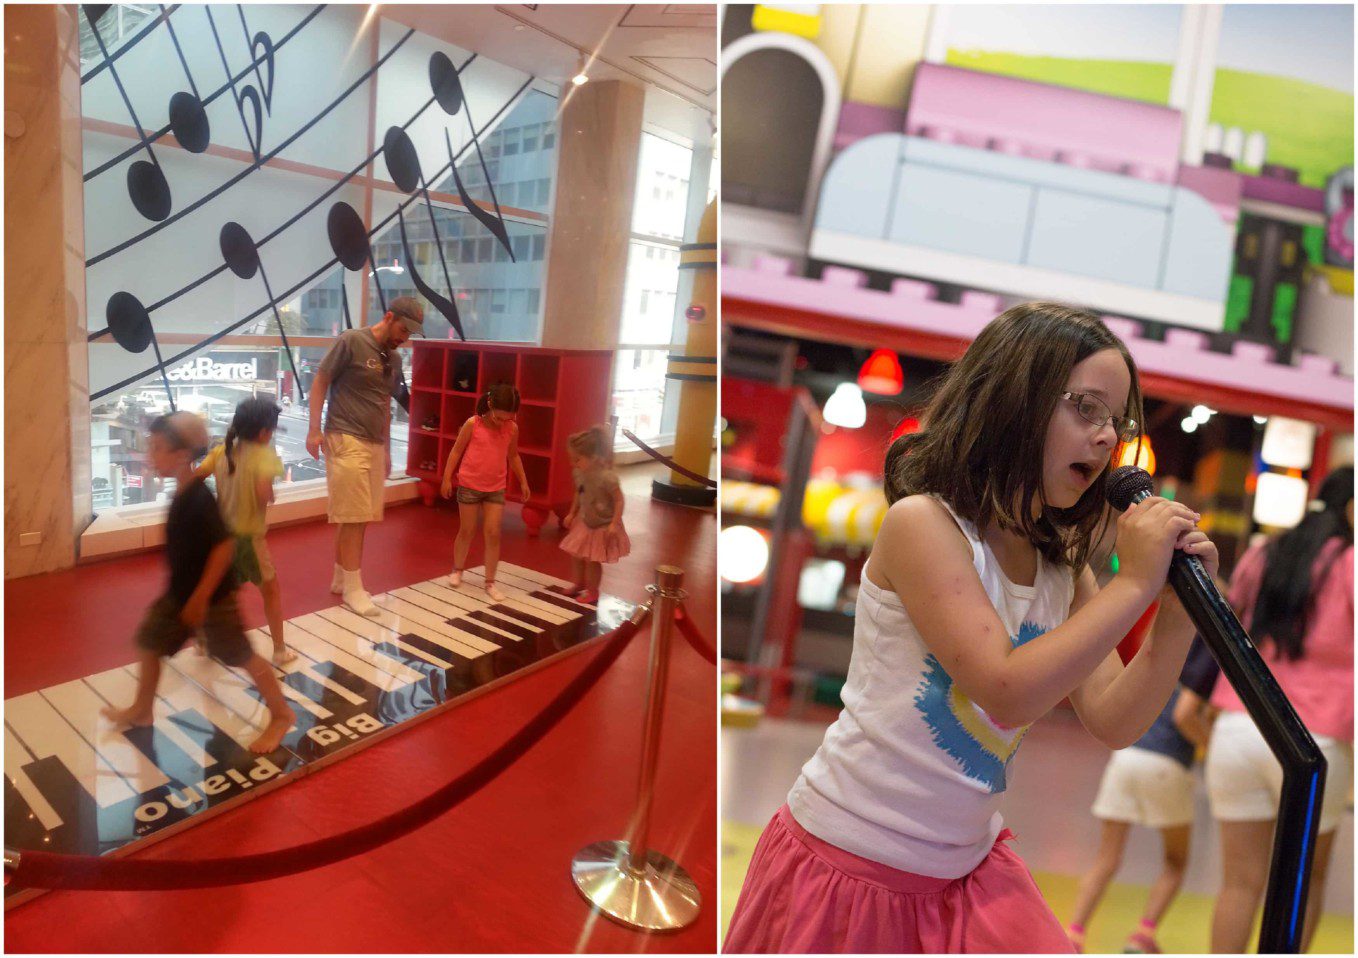 images of the people playing on the floor piano in FAO Schwartz in NYC and a girl singing into a microphone.